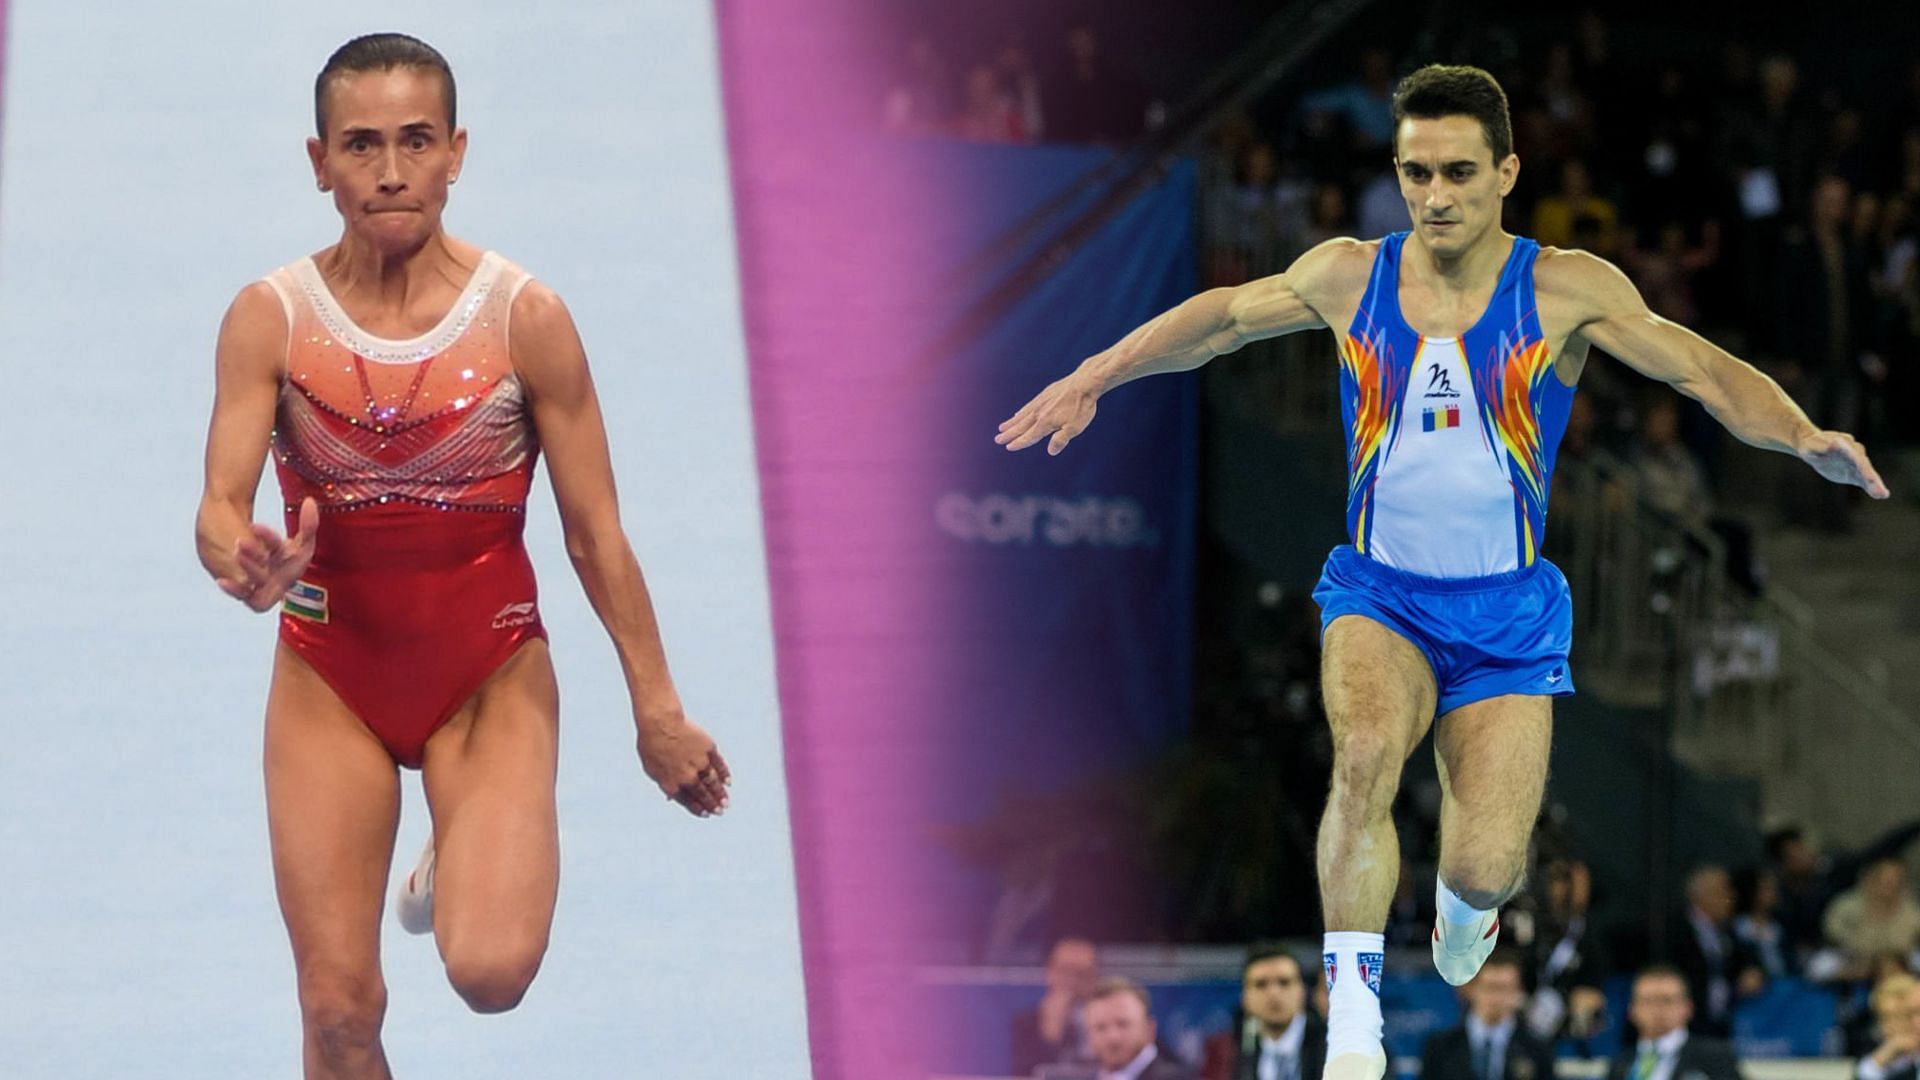 Oksana Chusovitina and Marian Dragulescu are two of the oldest gymnasts of all time